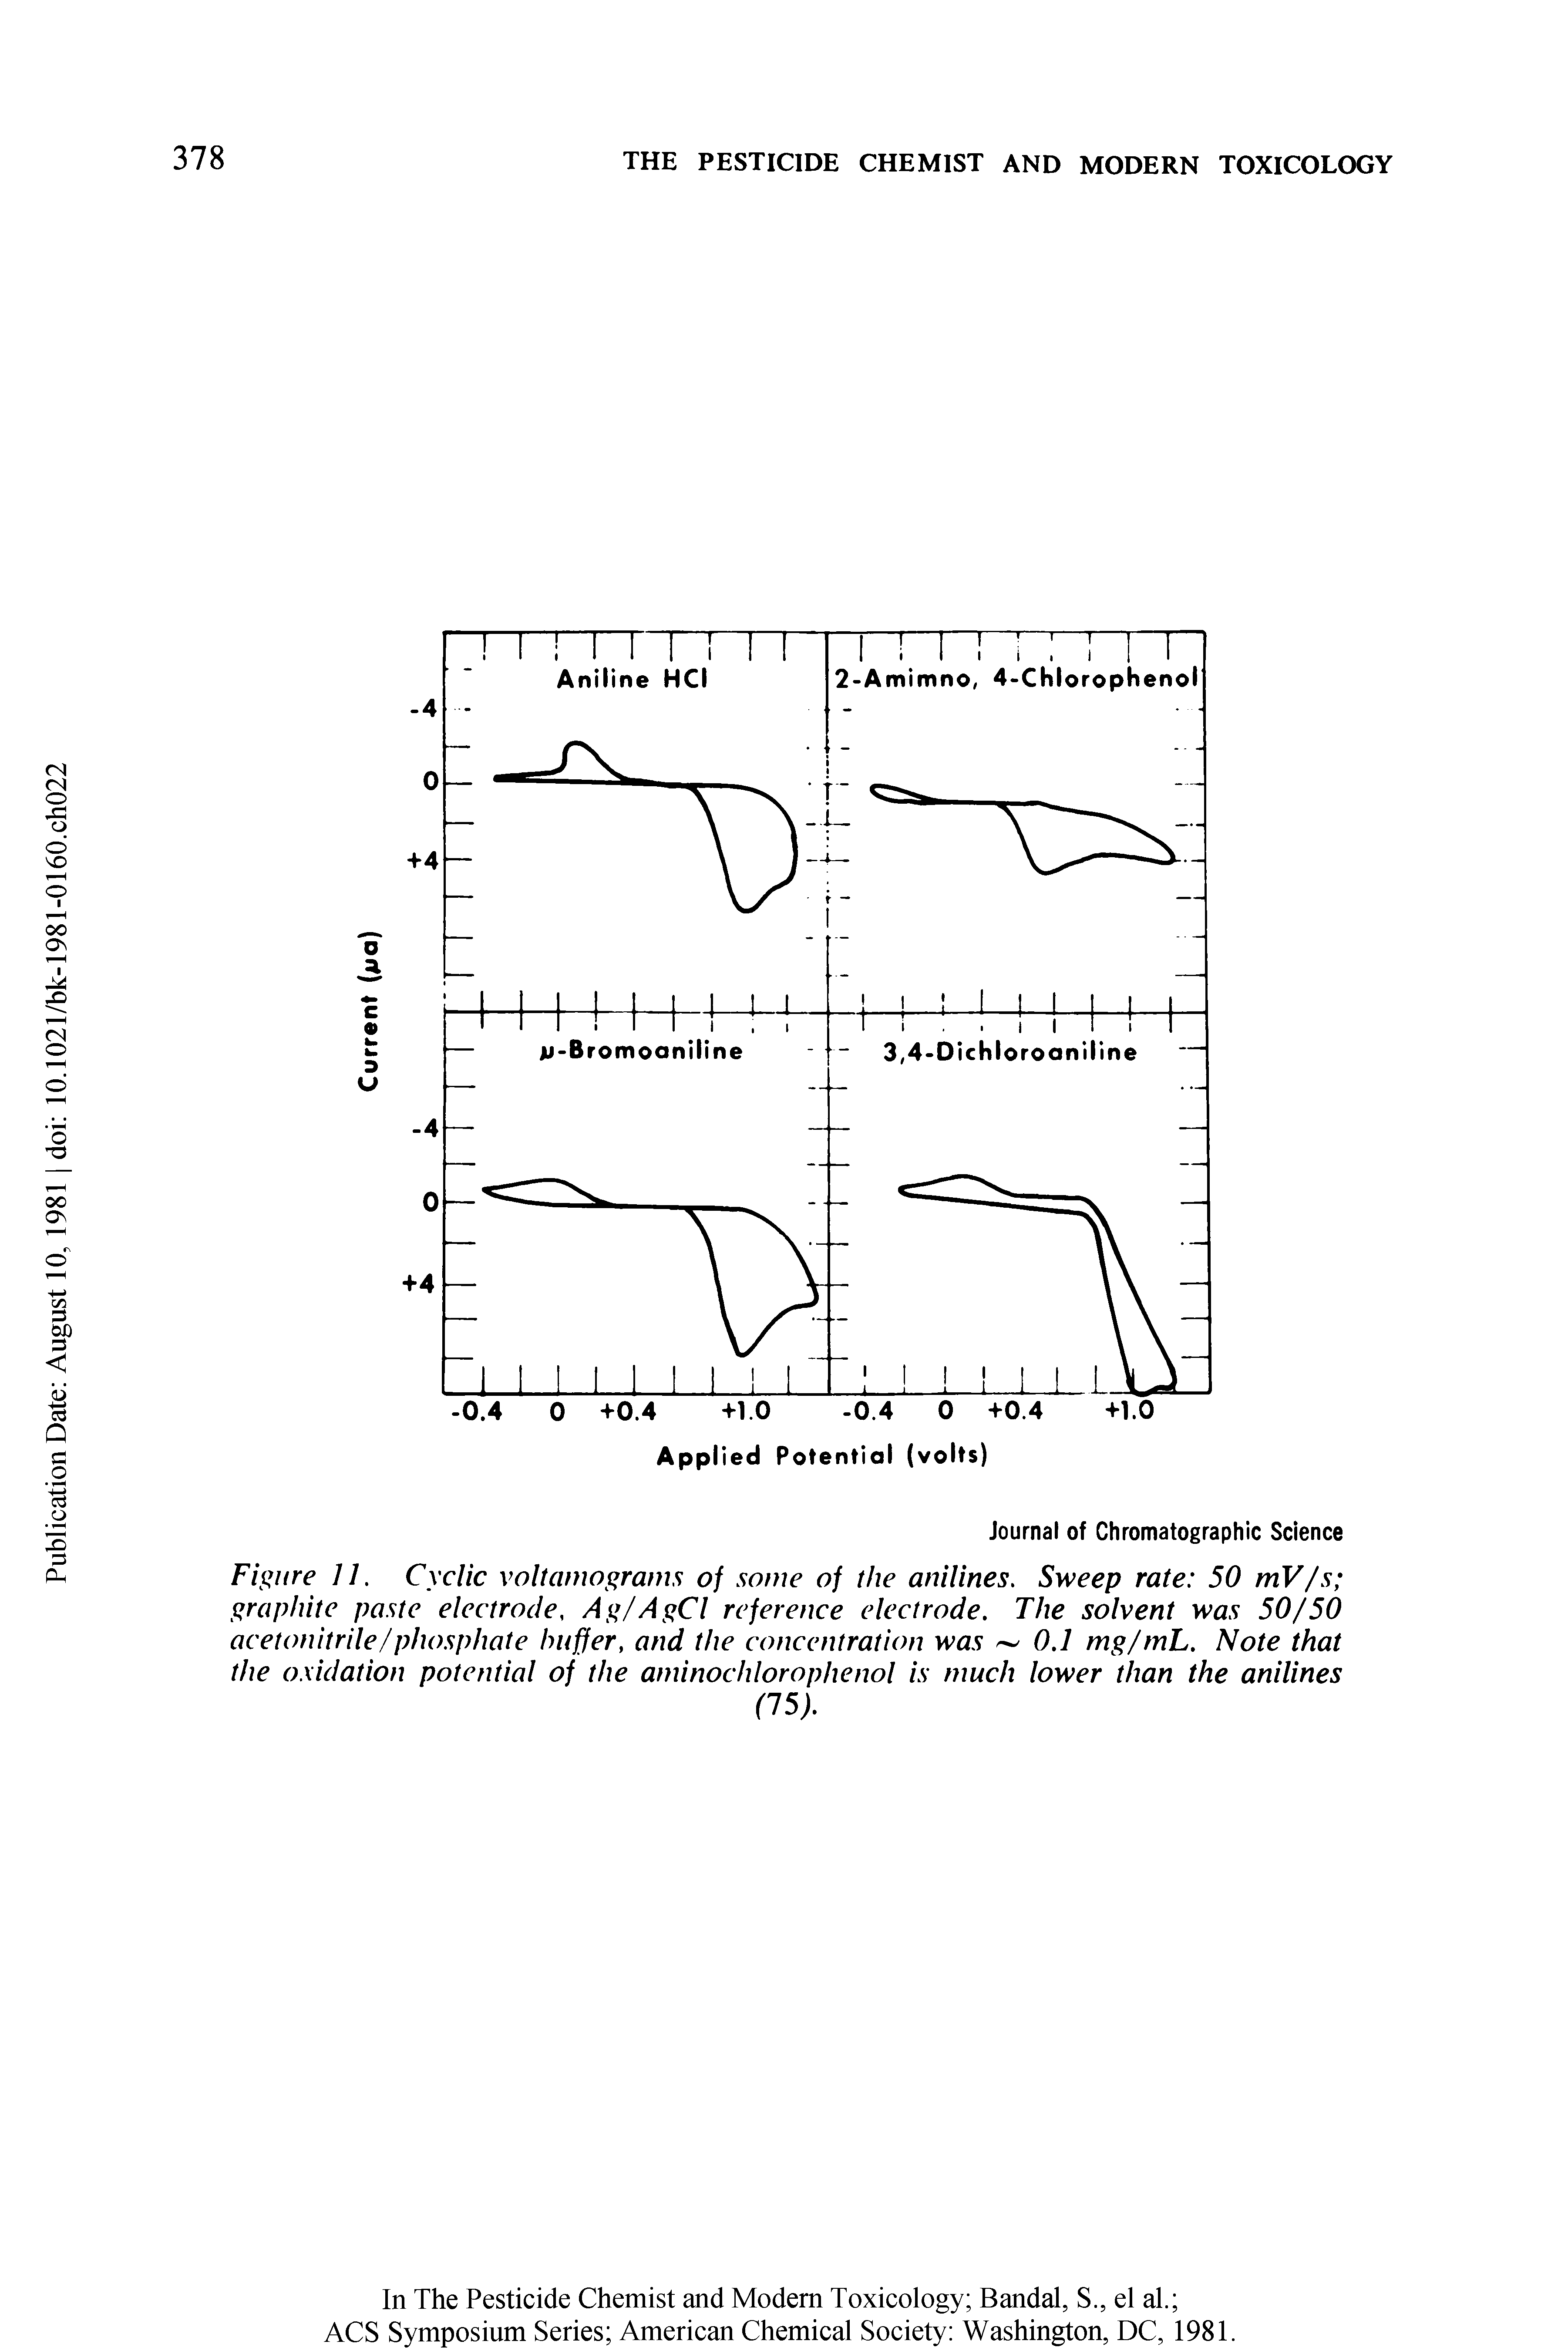 Figure 11. Cyclic voltamograms of some of the anilines. Sweep rate 50 mV/s graphite paste electrode, Ag/AgCl reference electrode. The solvent was 50/50 acetonitrile/phosphate buffer, and the concentration was 0.1 mg/mL. Note that the oxidation potential of the aminochlorophenol is much lower than the anilines...